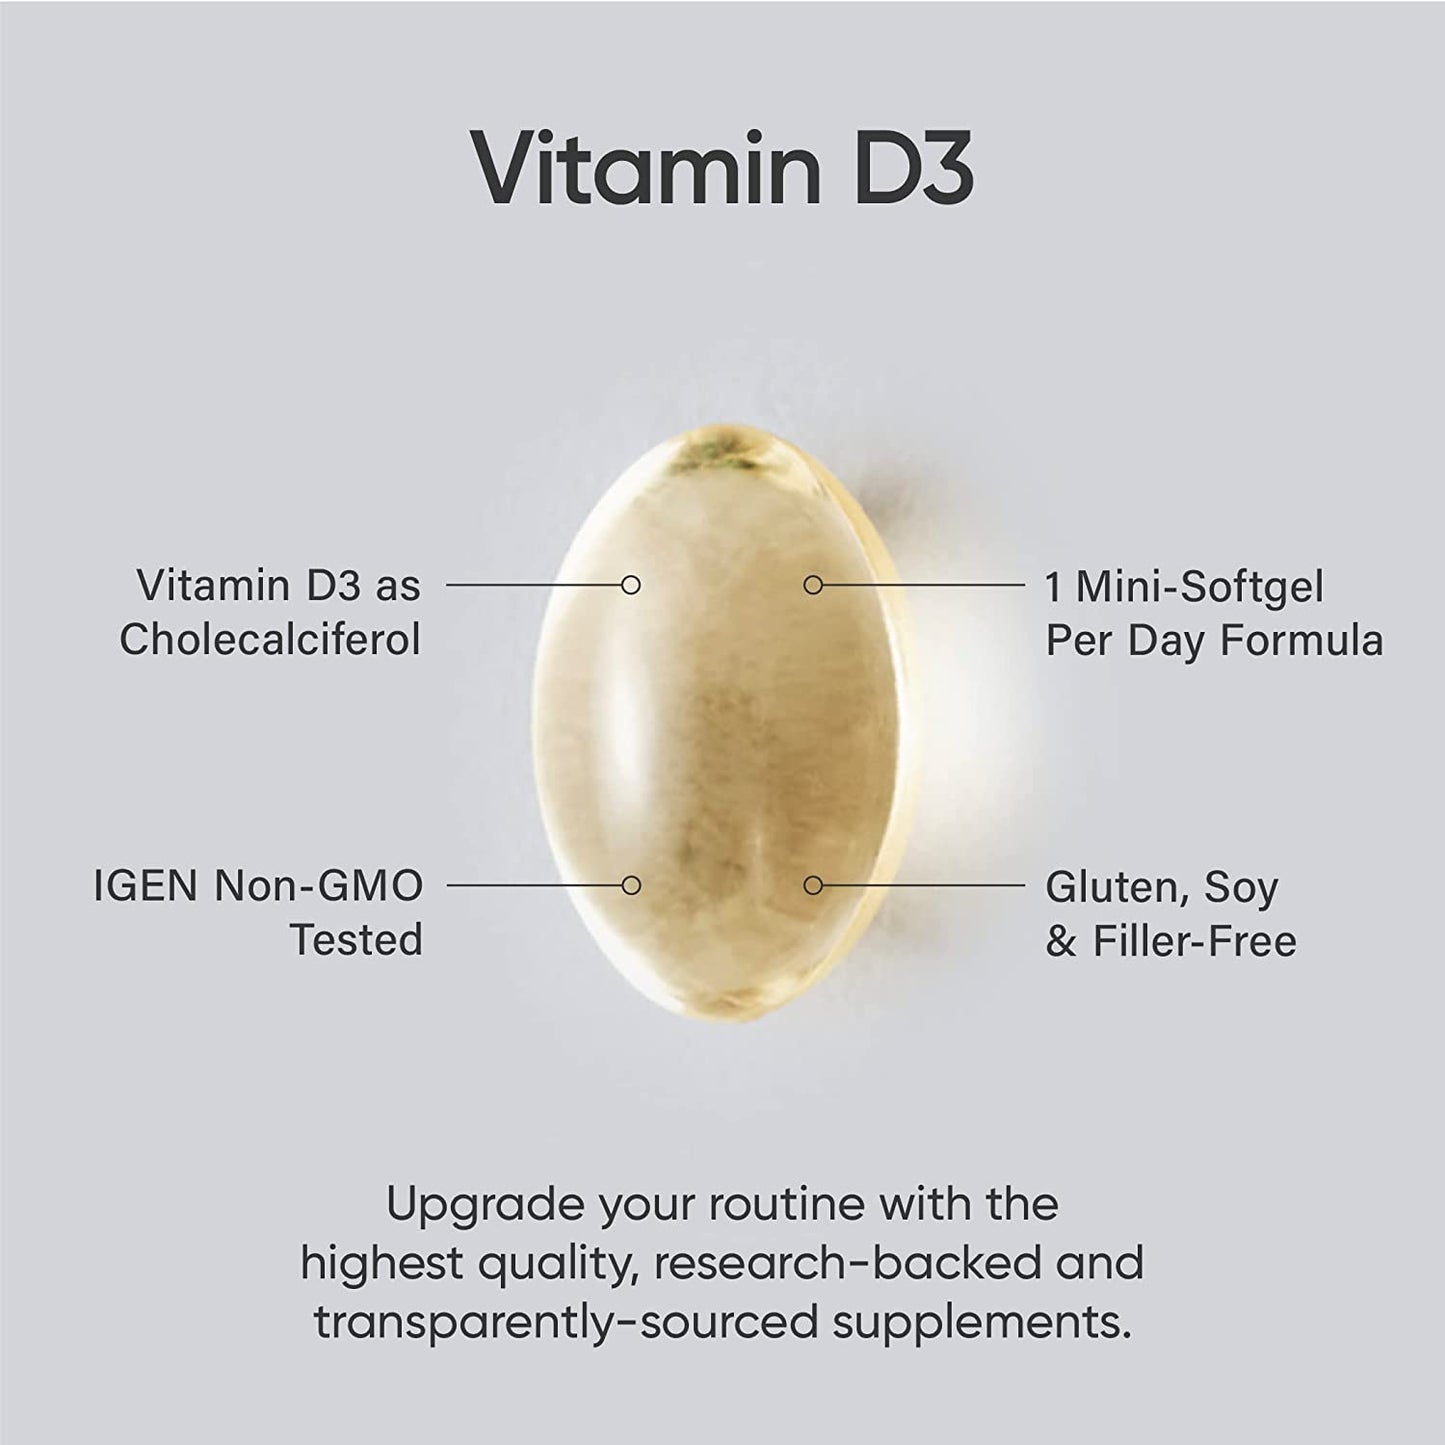 Sports Research Vitamin D3 with Coconut Oil Softgels